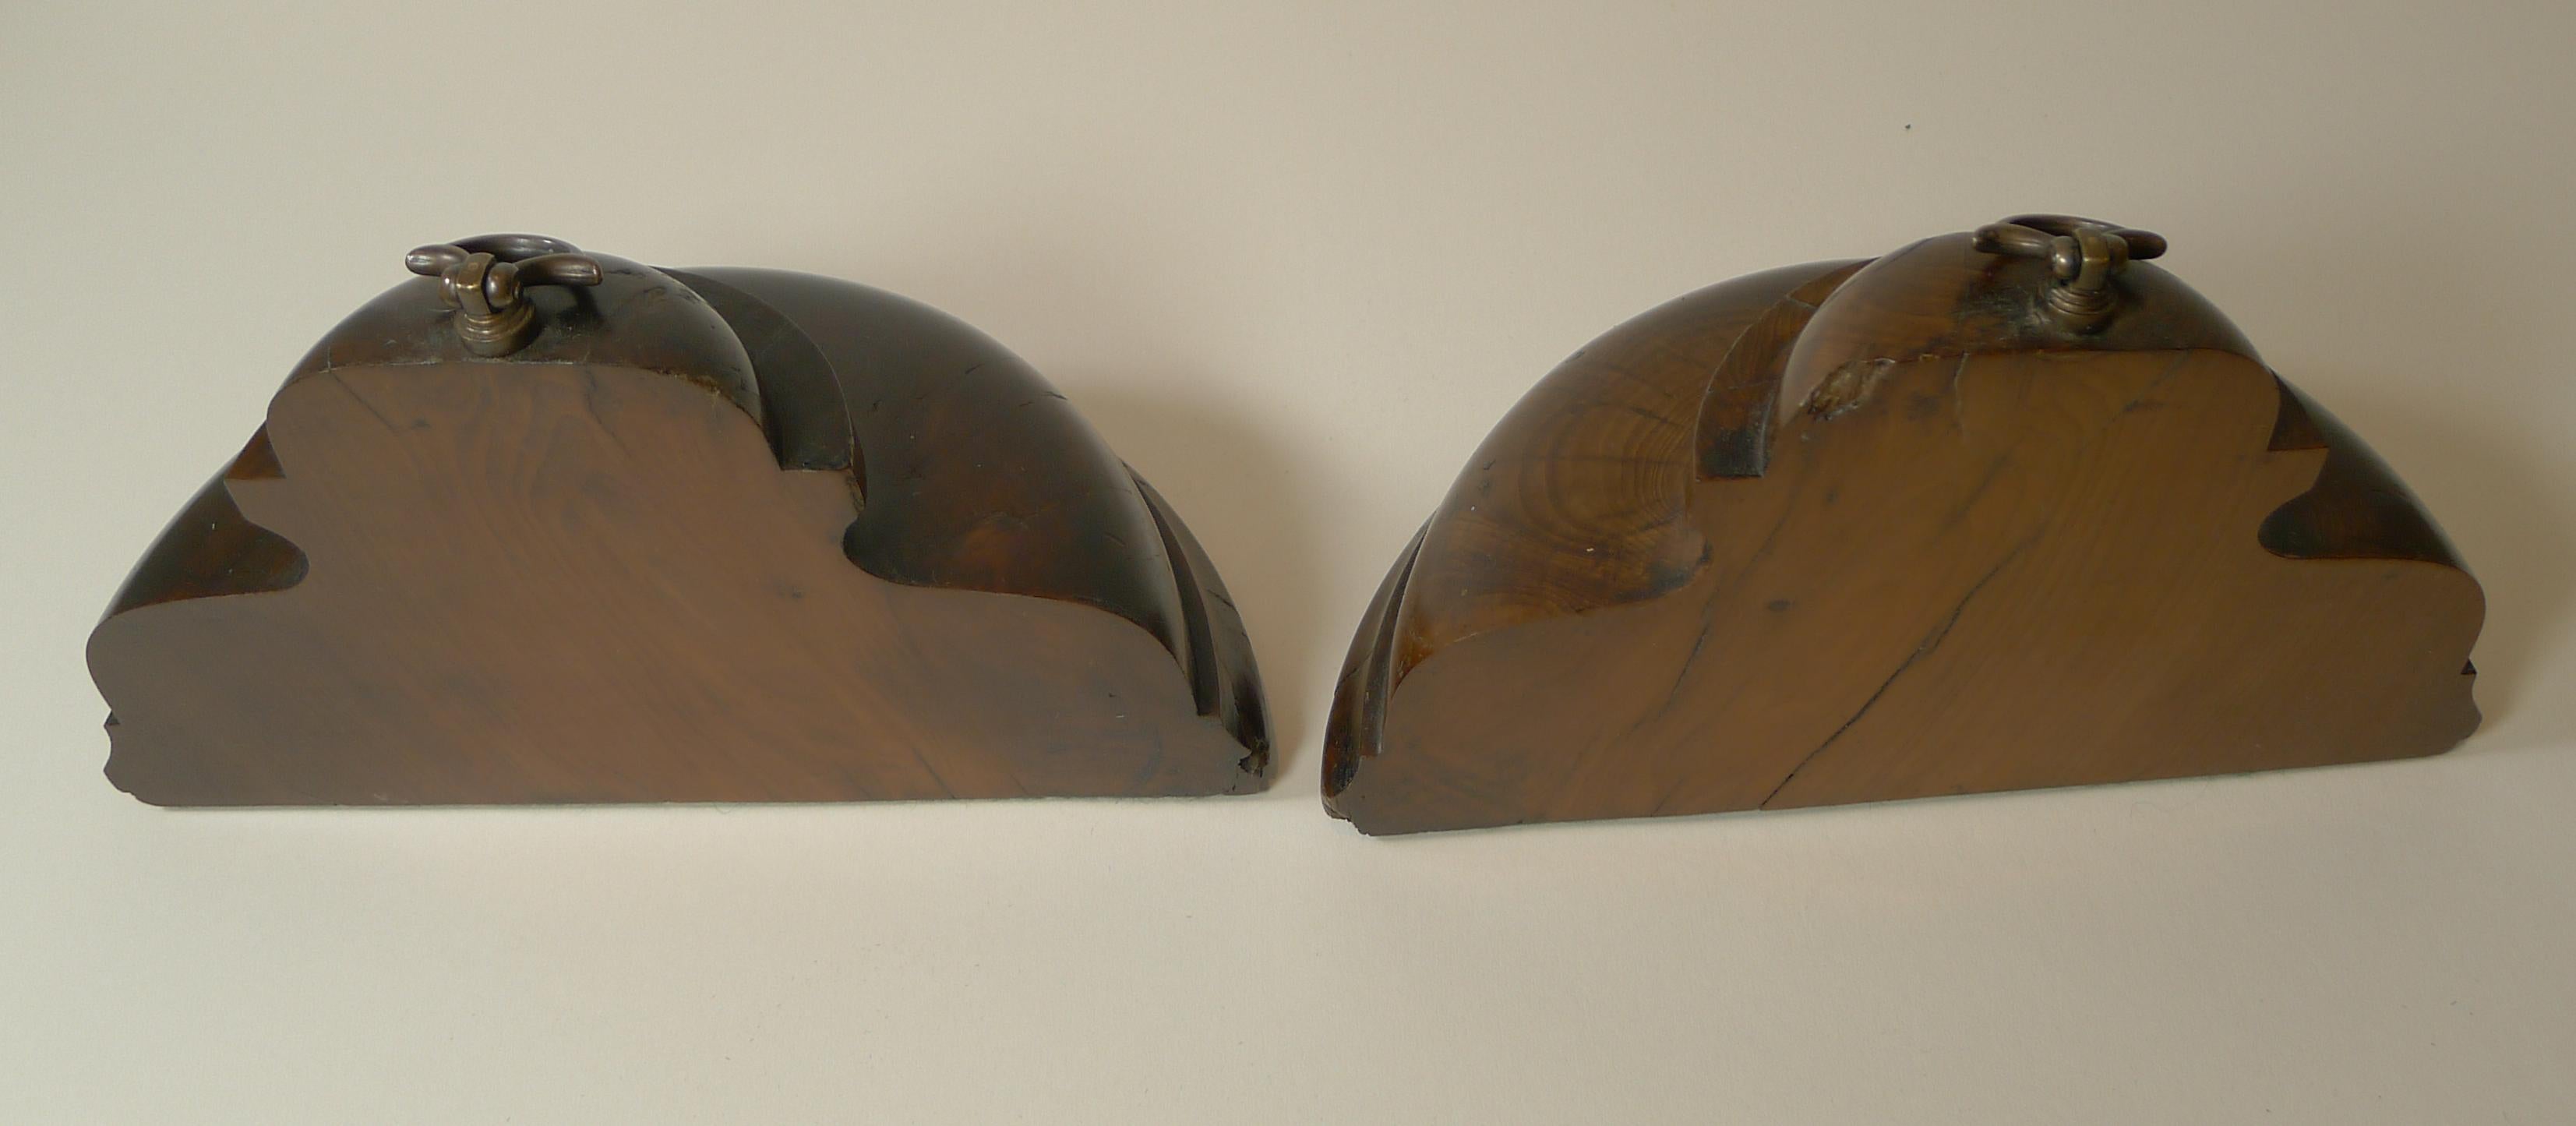 Unusual Pair Georgian Solid Yew Wood Bookends c.1800 For Sale 1